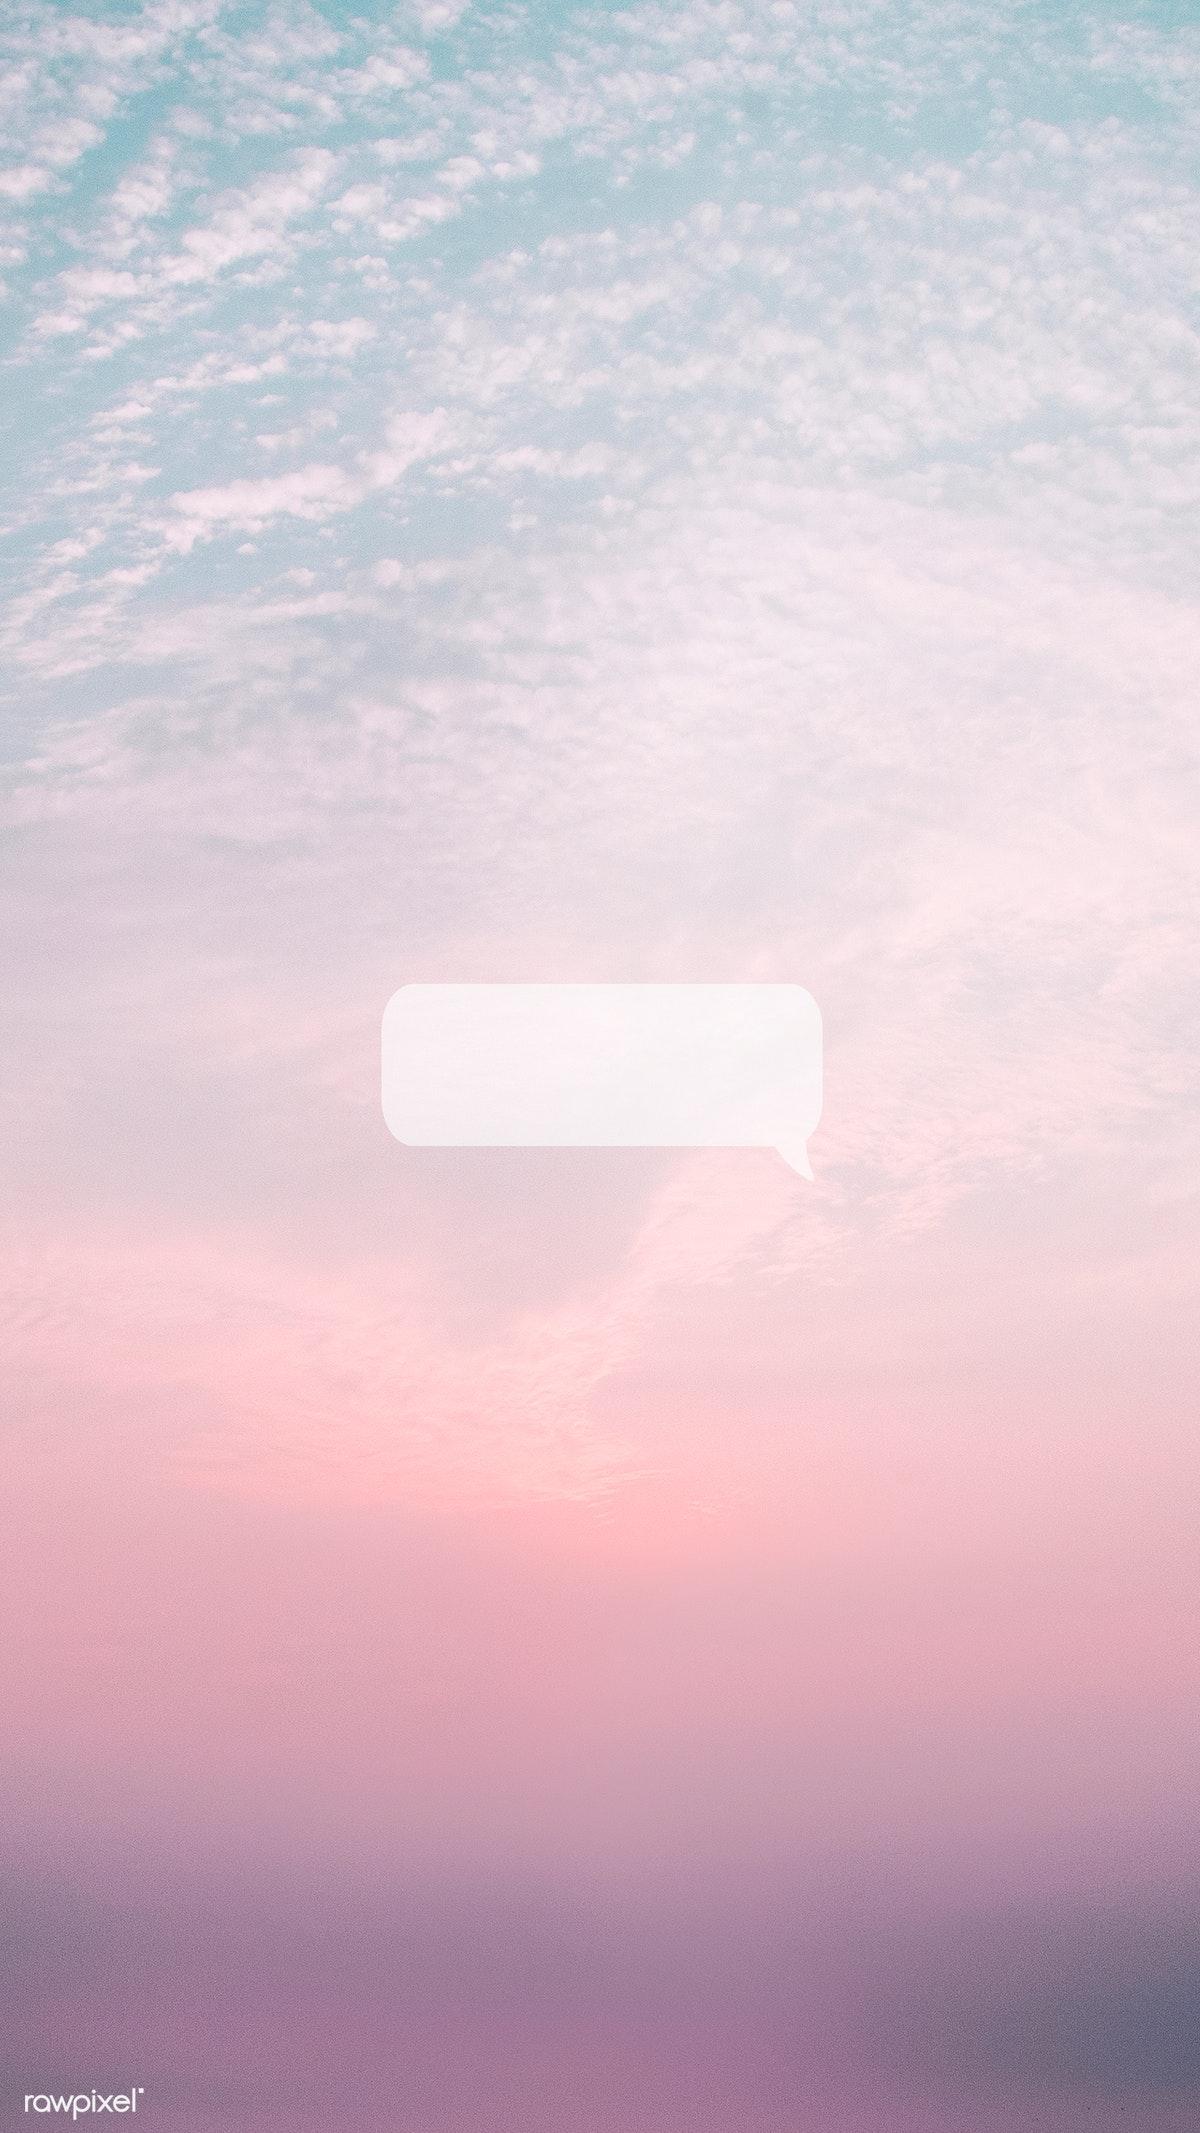 Download premium image of Cotton candy sky with blank speech bubble mobile